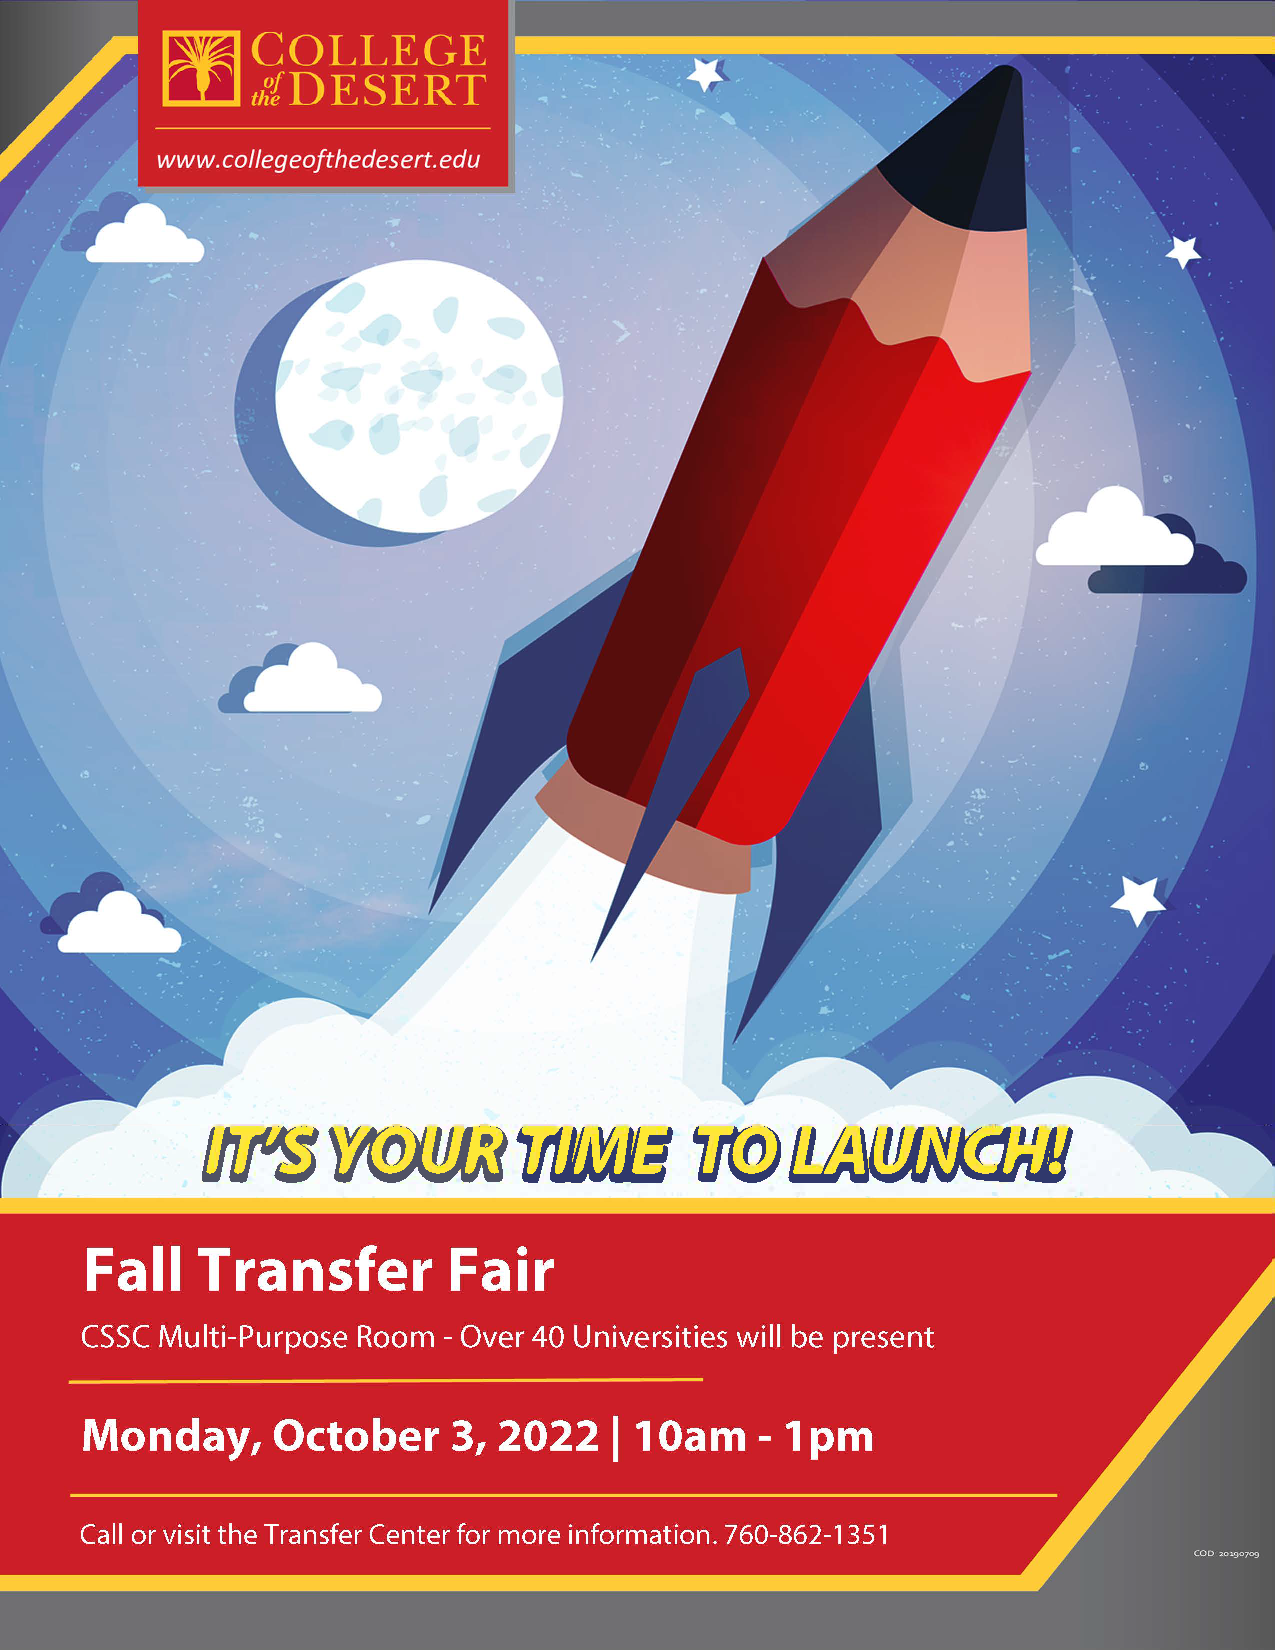 It's your time to launch! Fall Transfer Fair on Monday, October 3rd from 10am to 1pm in the CSSC Multi-purpose room